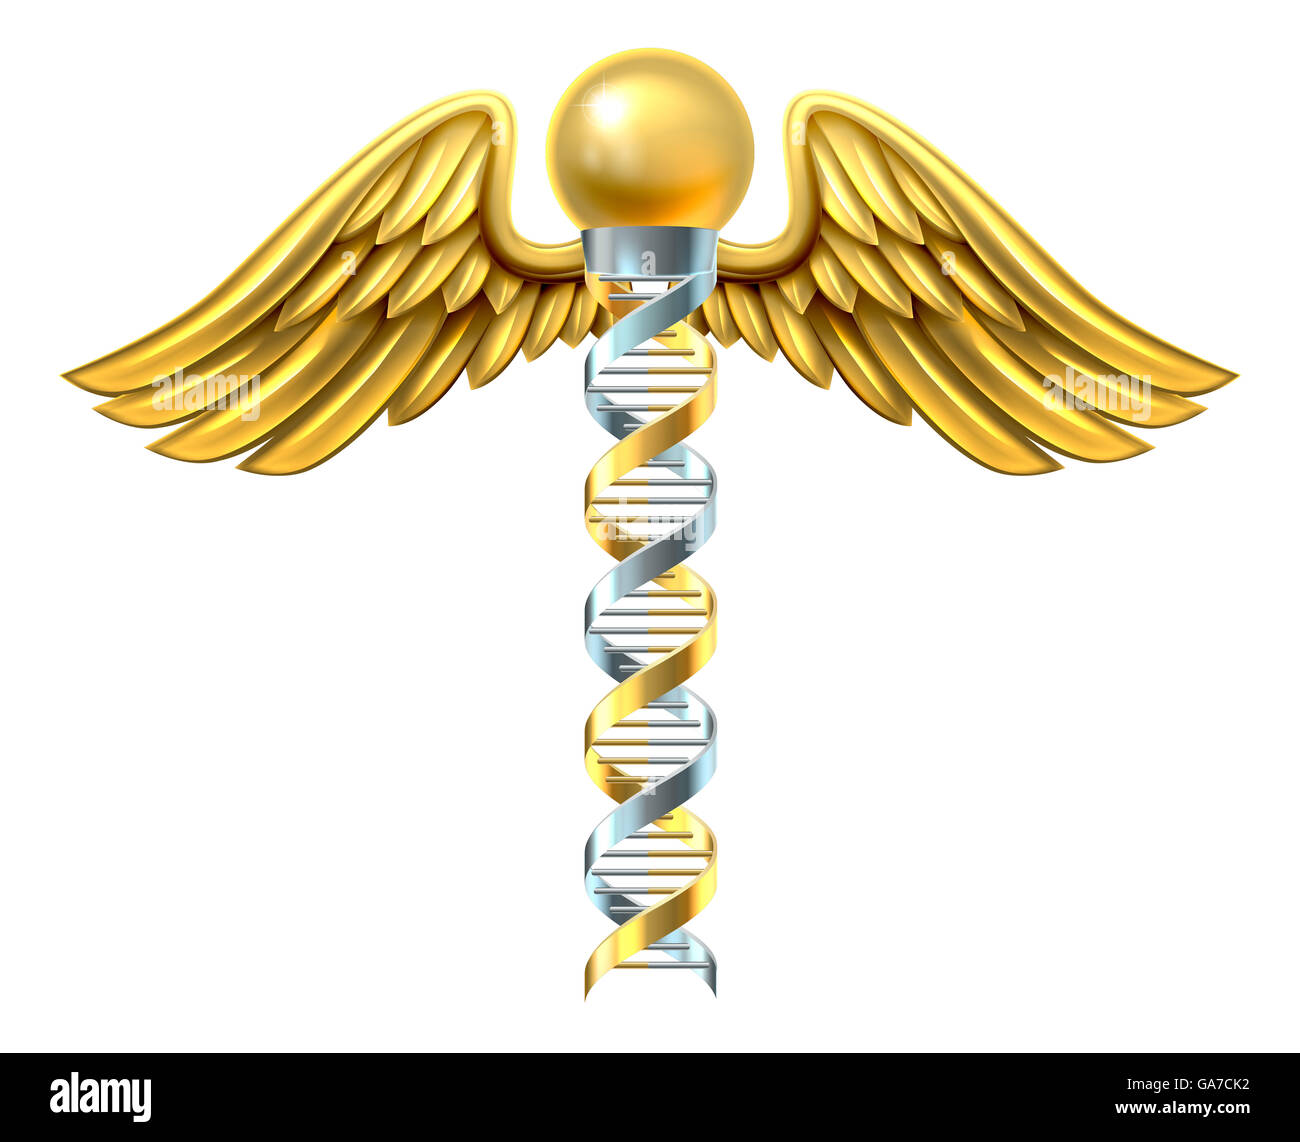 Caduceus medical symbol with human DNA double helix genetic chromosome strand. Stock Photo